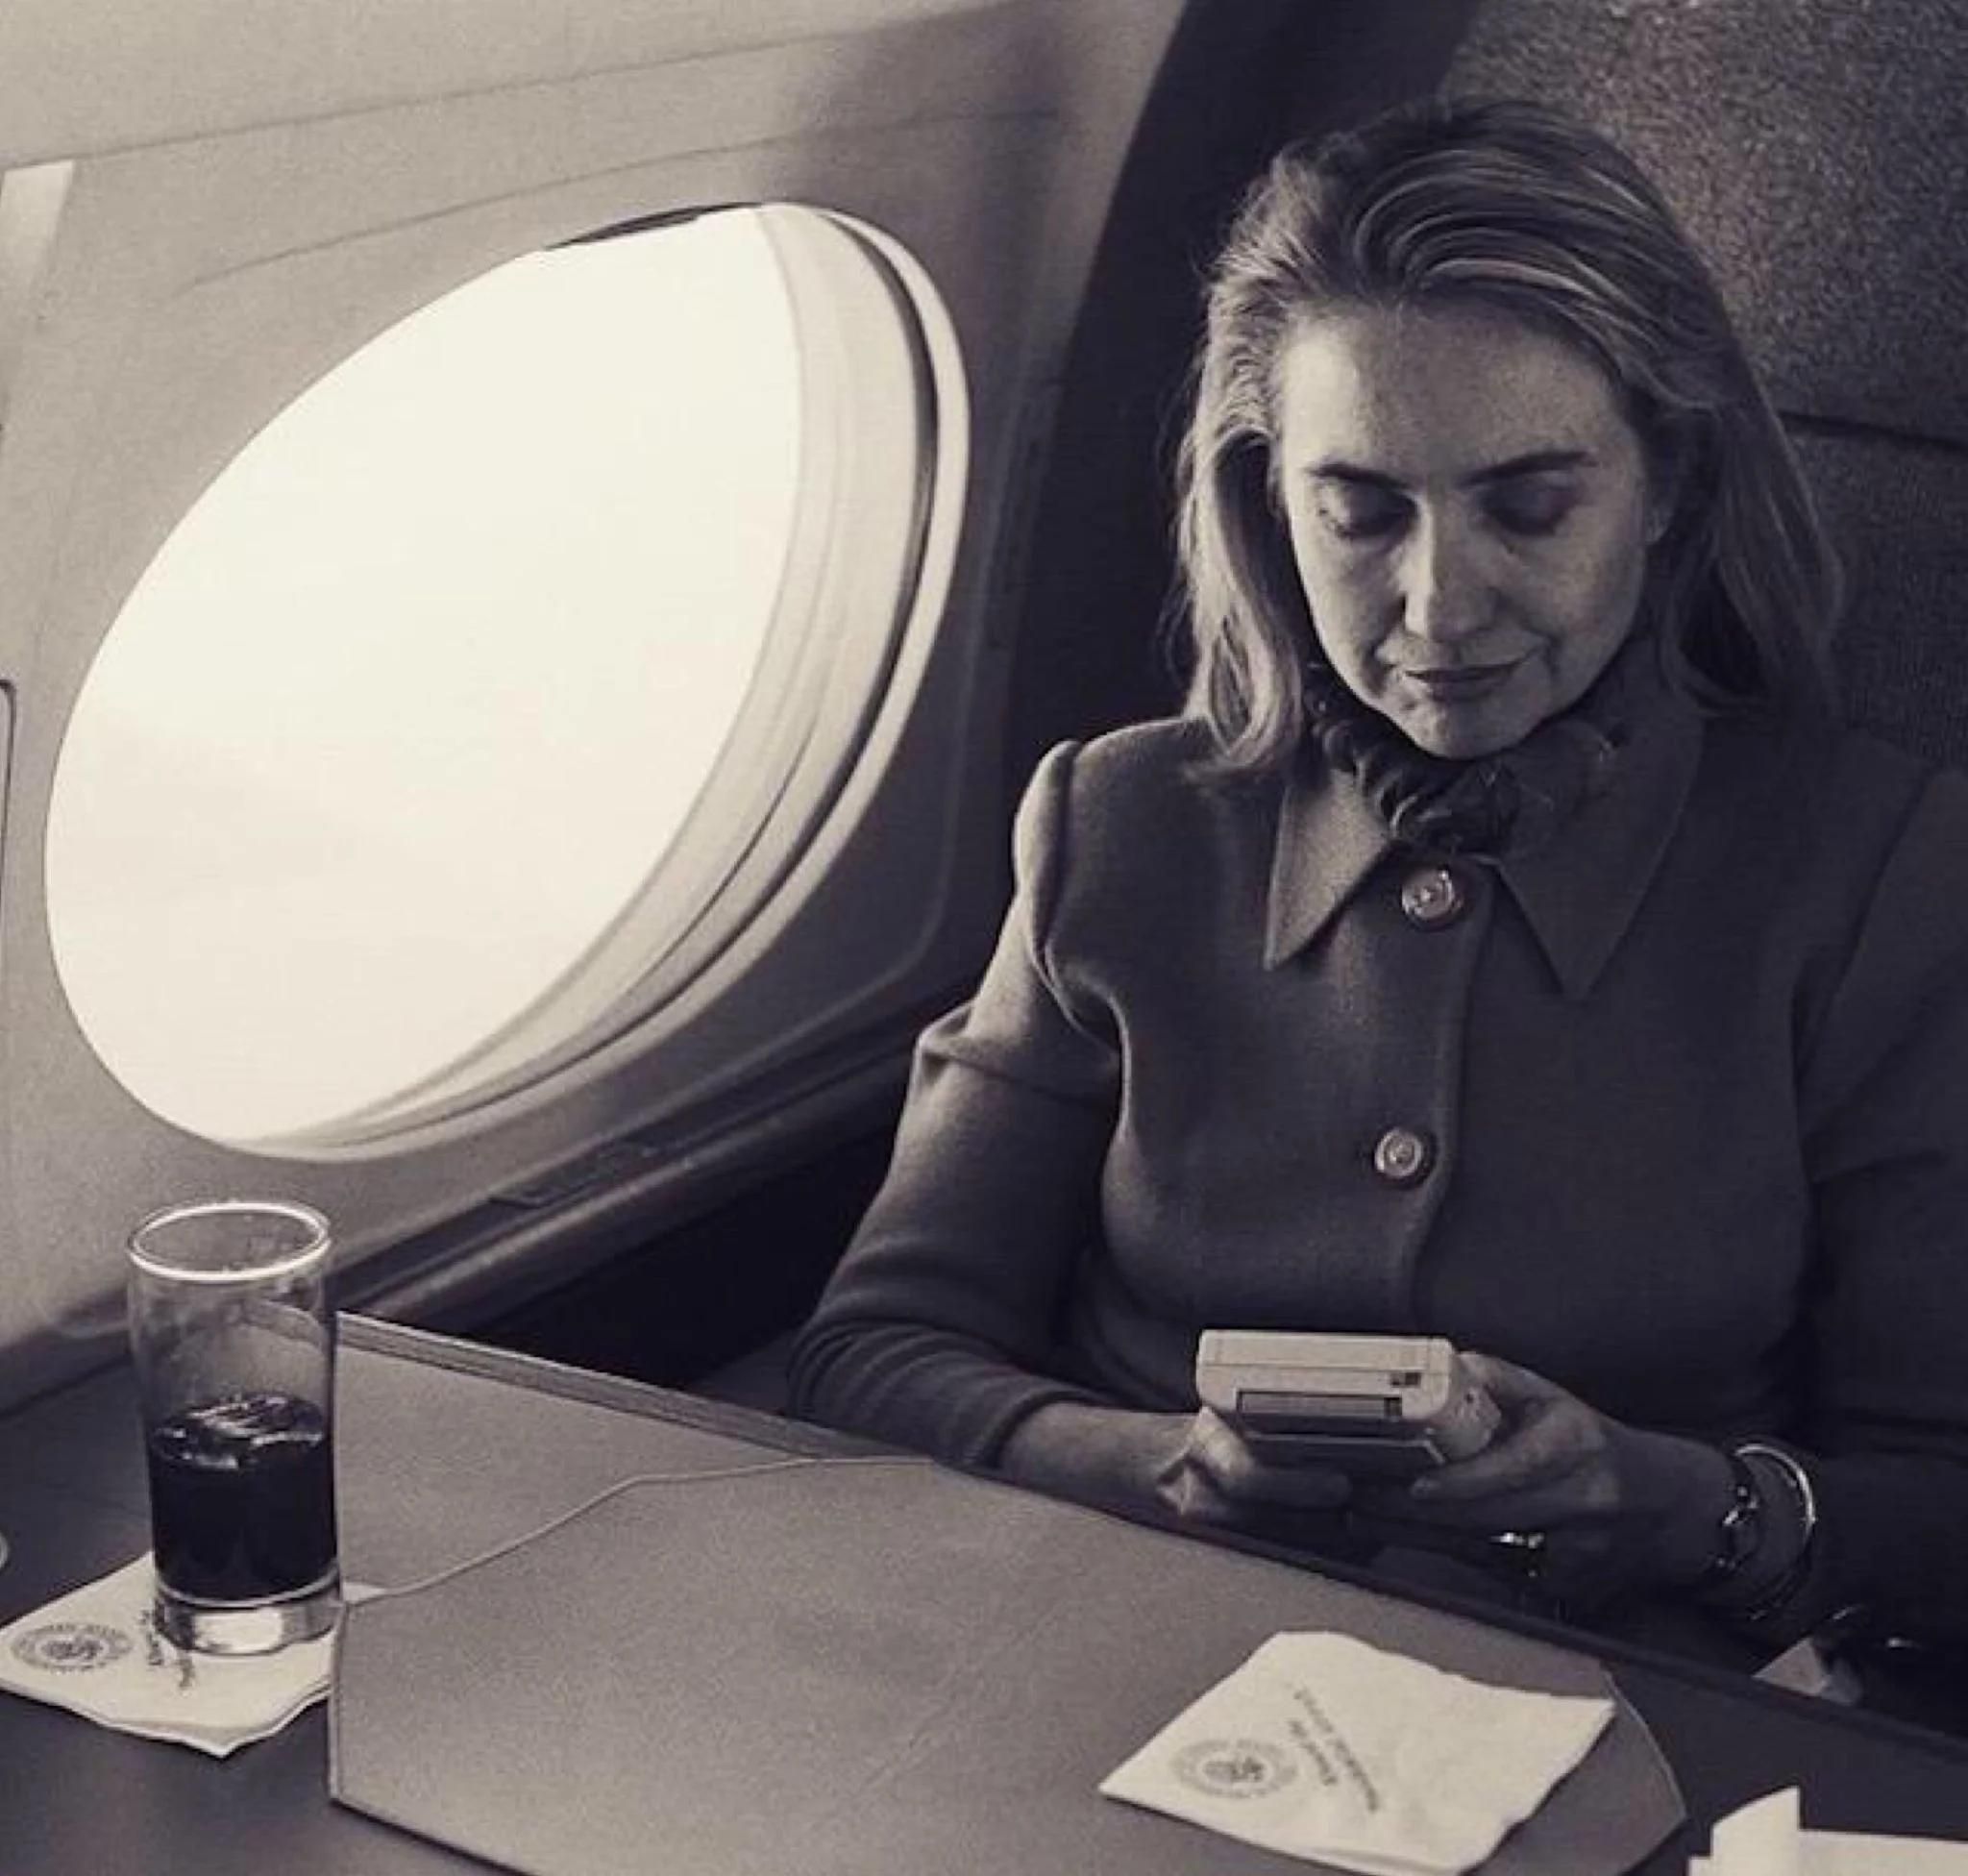 Hillary about to send an email for the first time, 1993